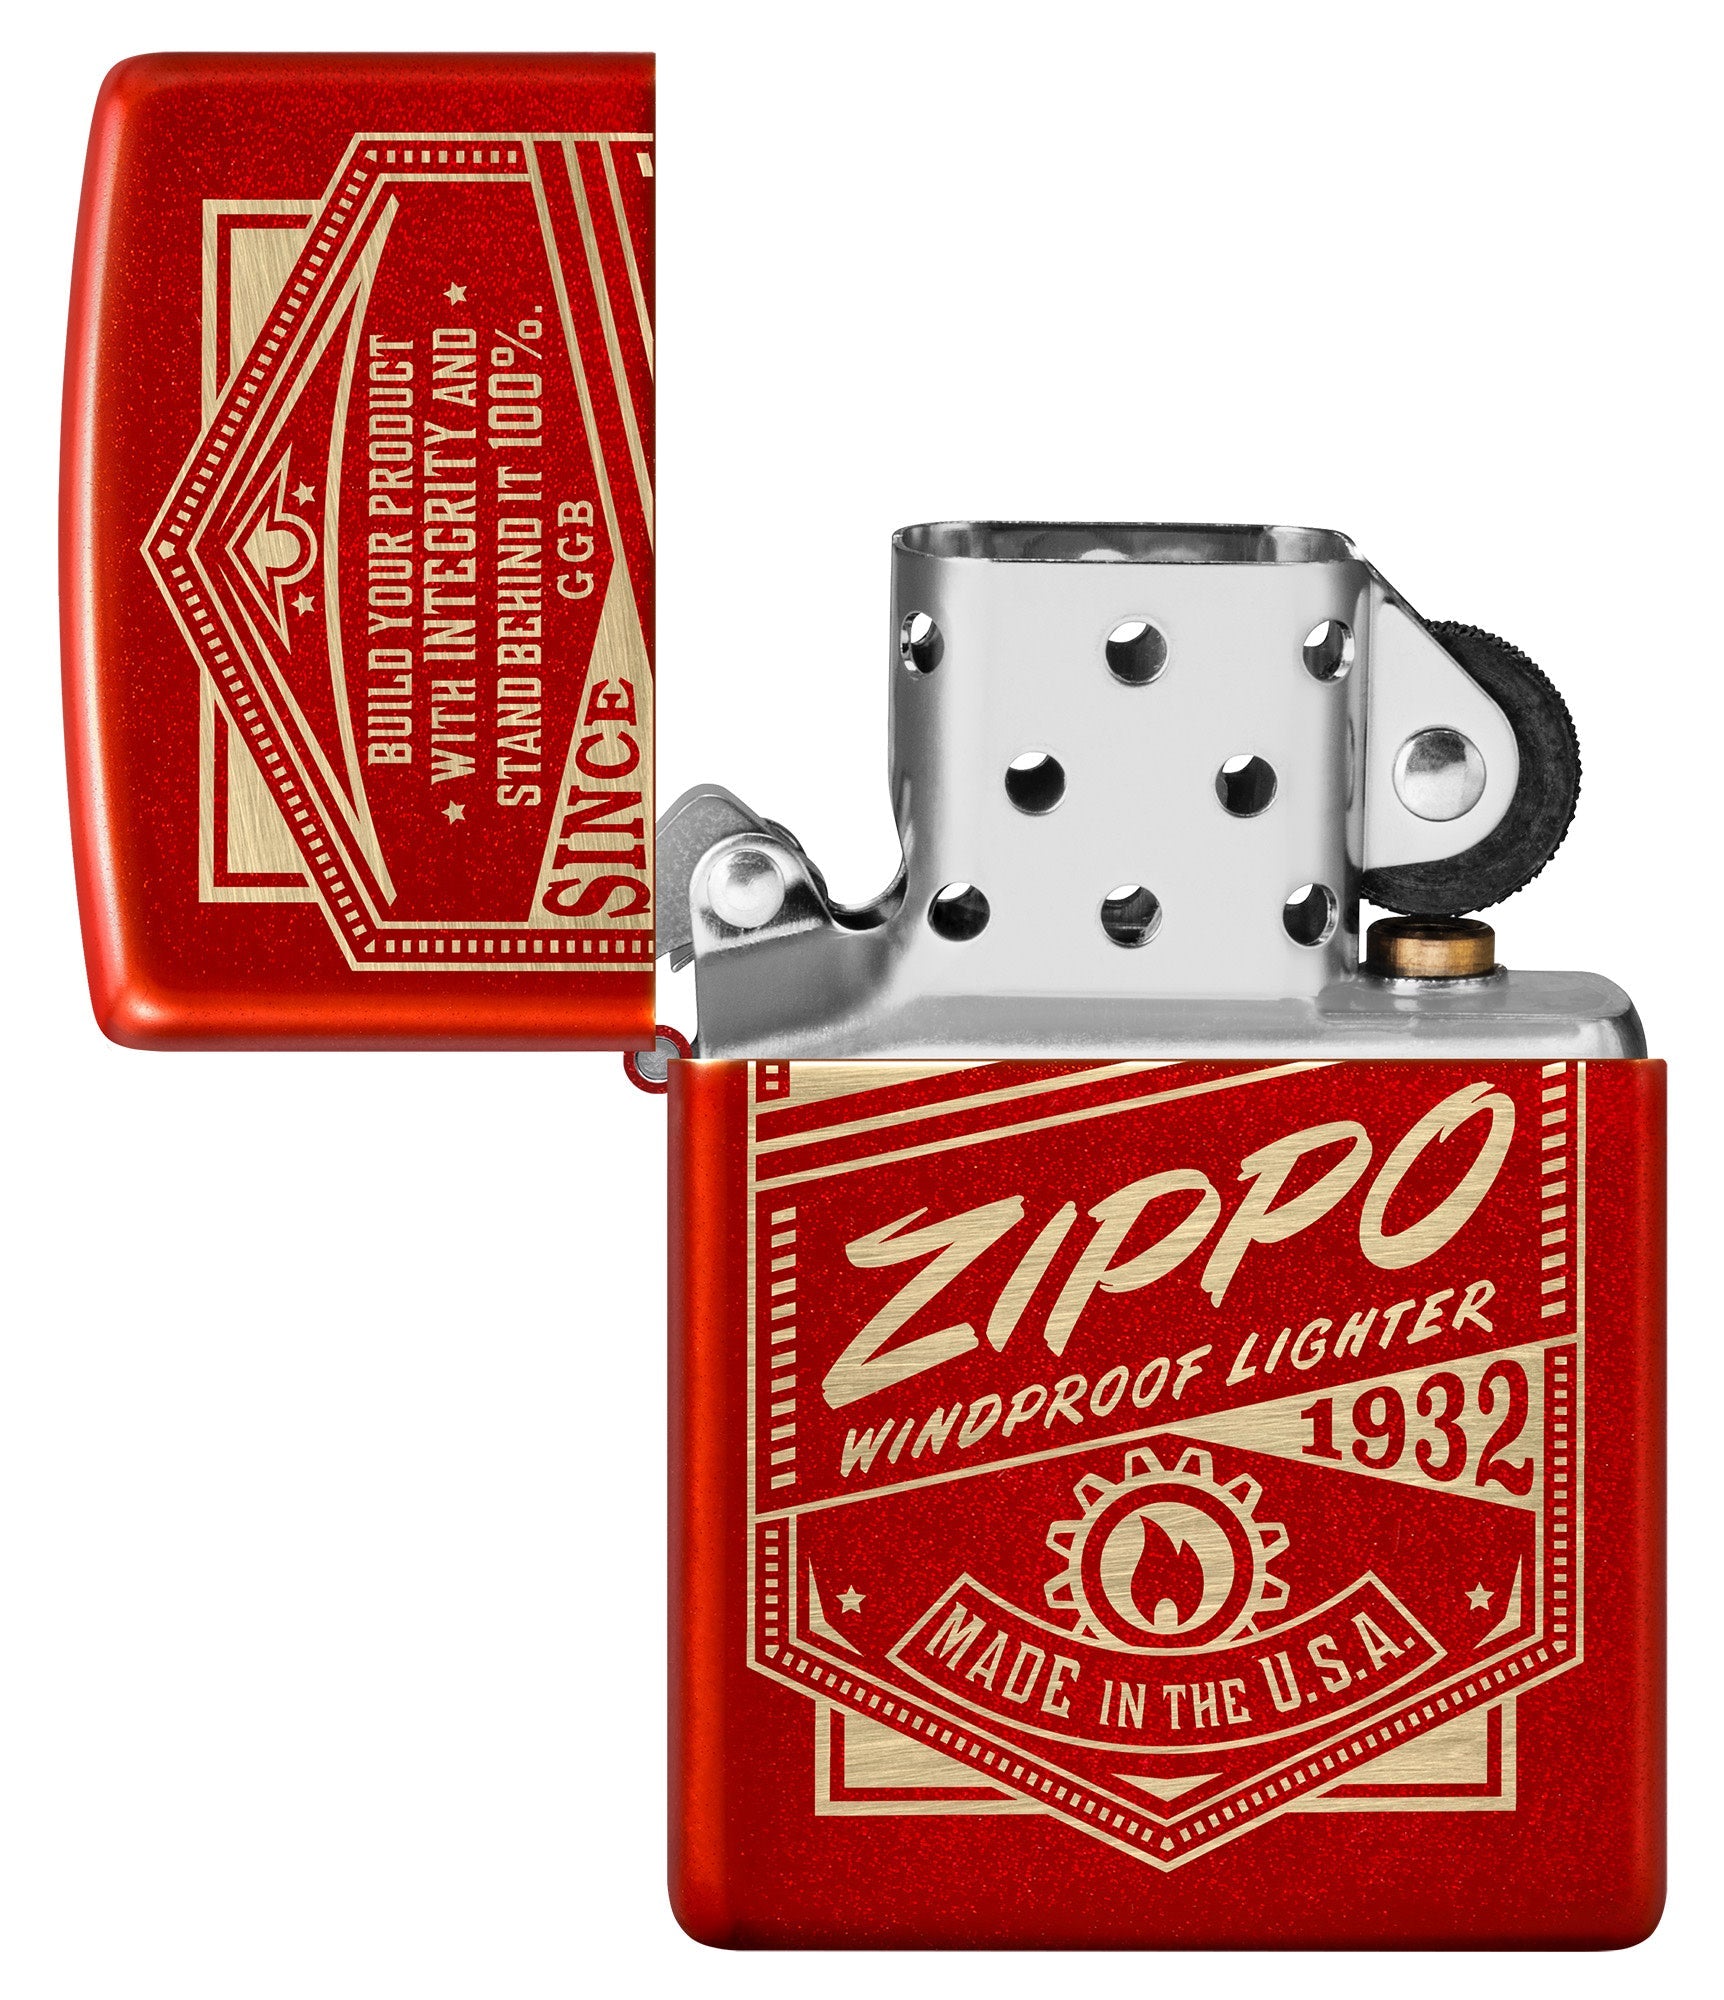 Zippo It Works Design Metallic Red Windproof Lighter with its lid open and unlit.